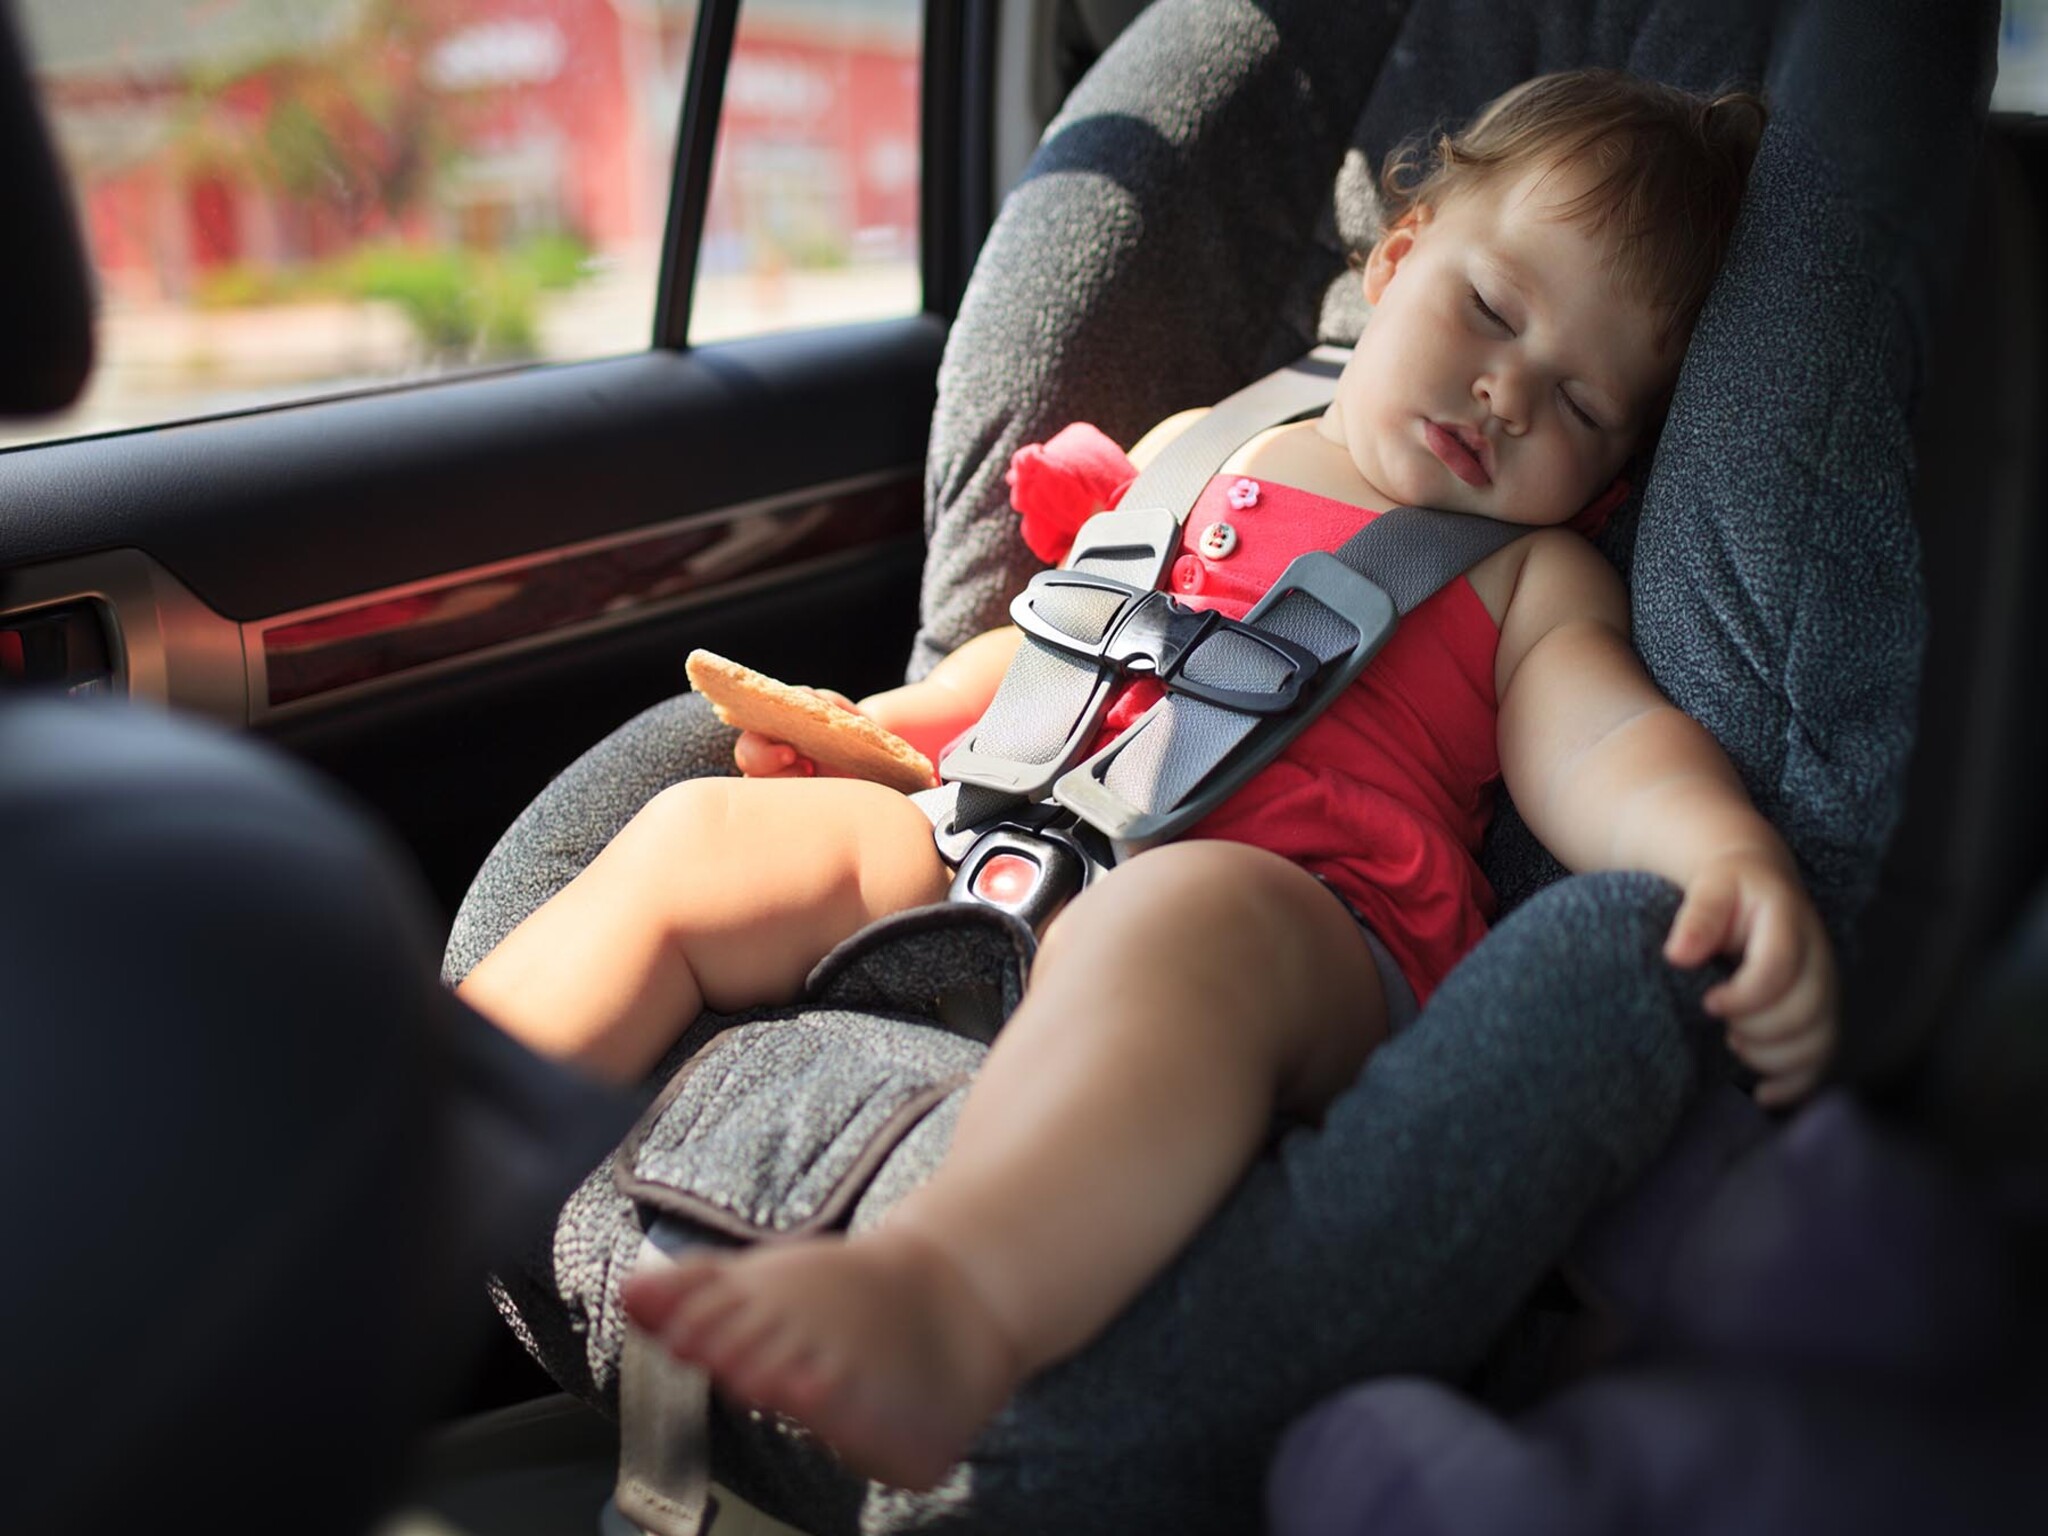 The UAE announces a fine of 1 million dirhams for leaving a child in the car